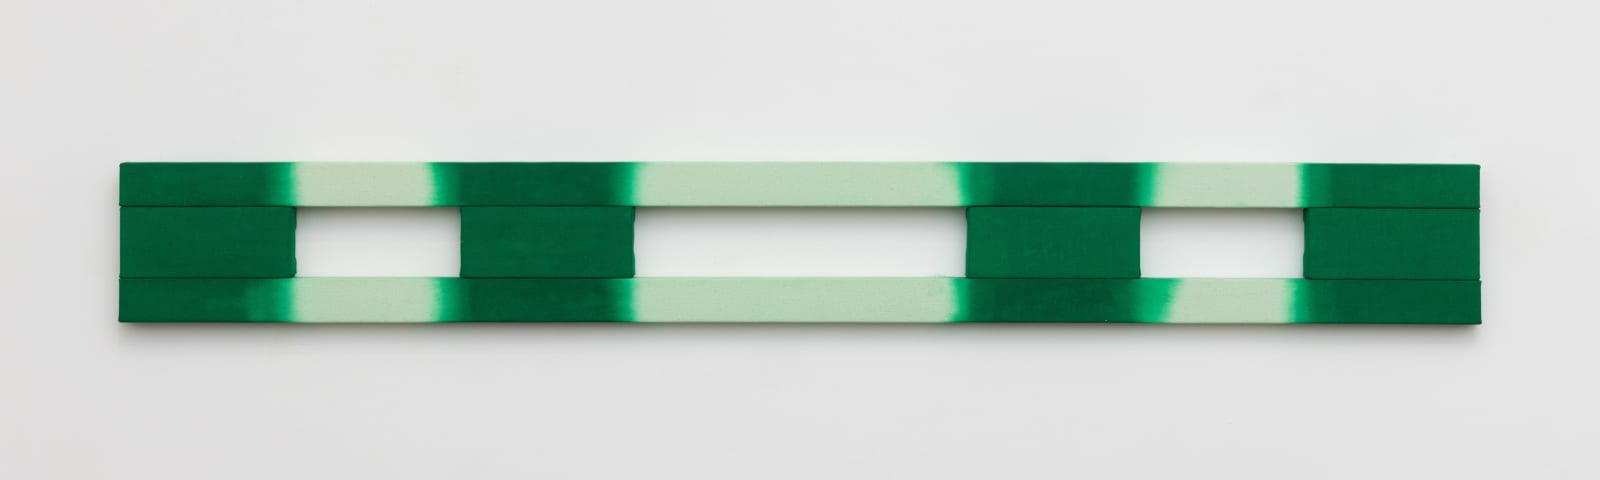 Horizontal shaped canvas painting stretched on six wooden bars varying in length and colors of green and white.